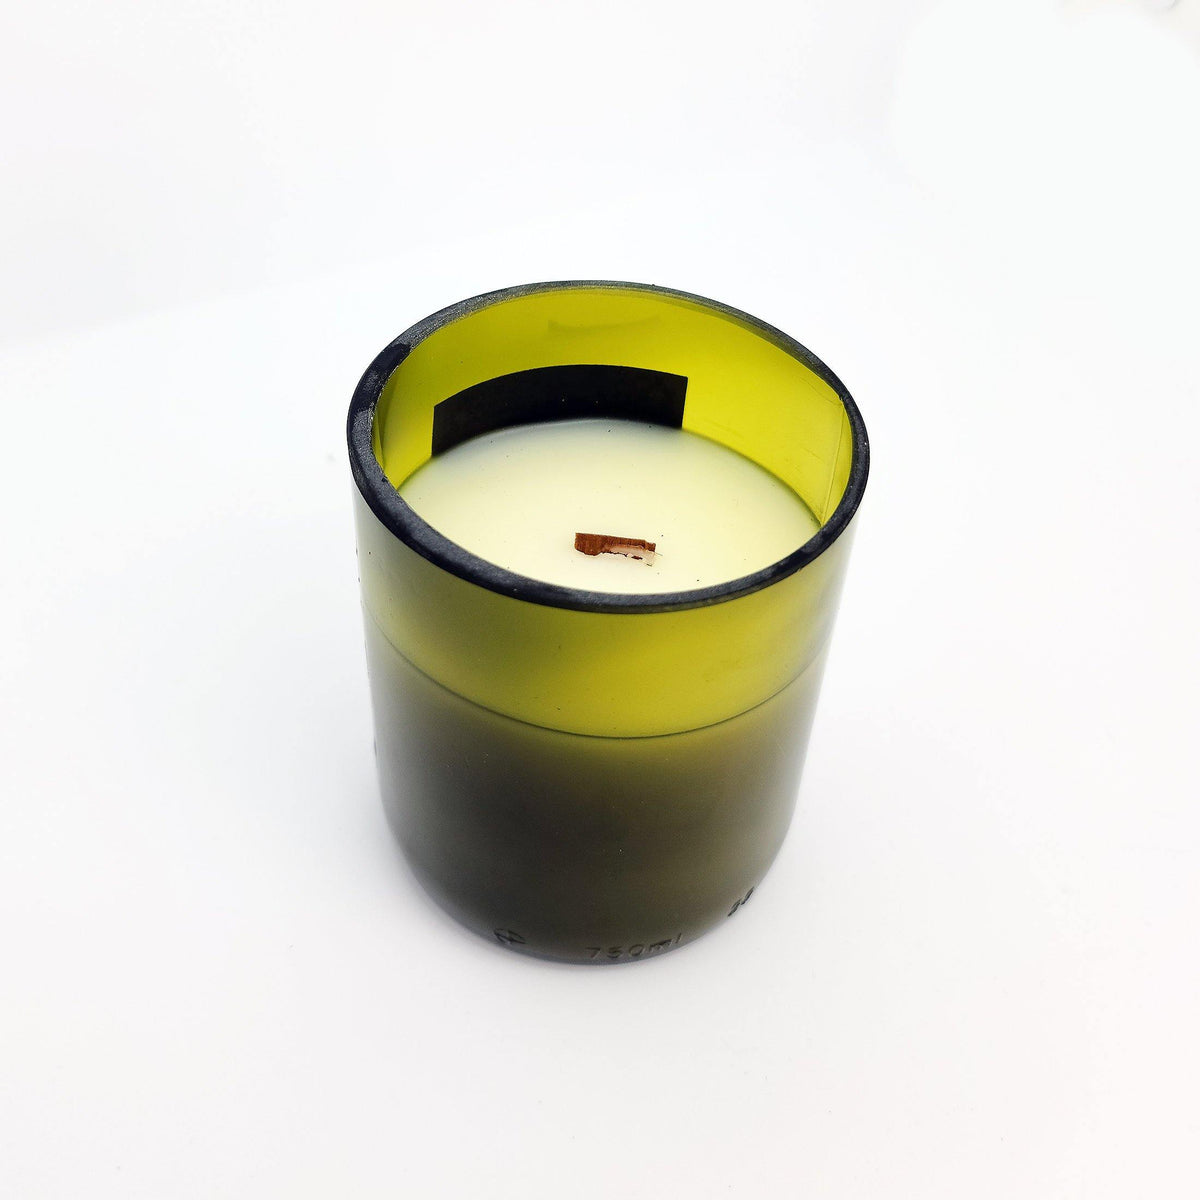 Honey & Bourbon Wooden Wick Scented Candle - LUVOCANDLES - Scented Wooden Wick Handmade in Montreal